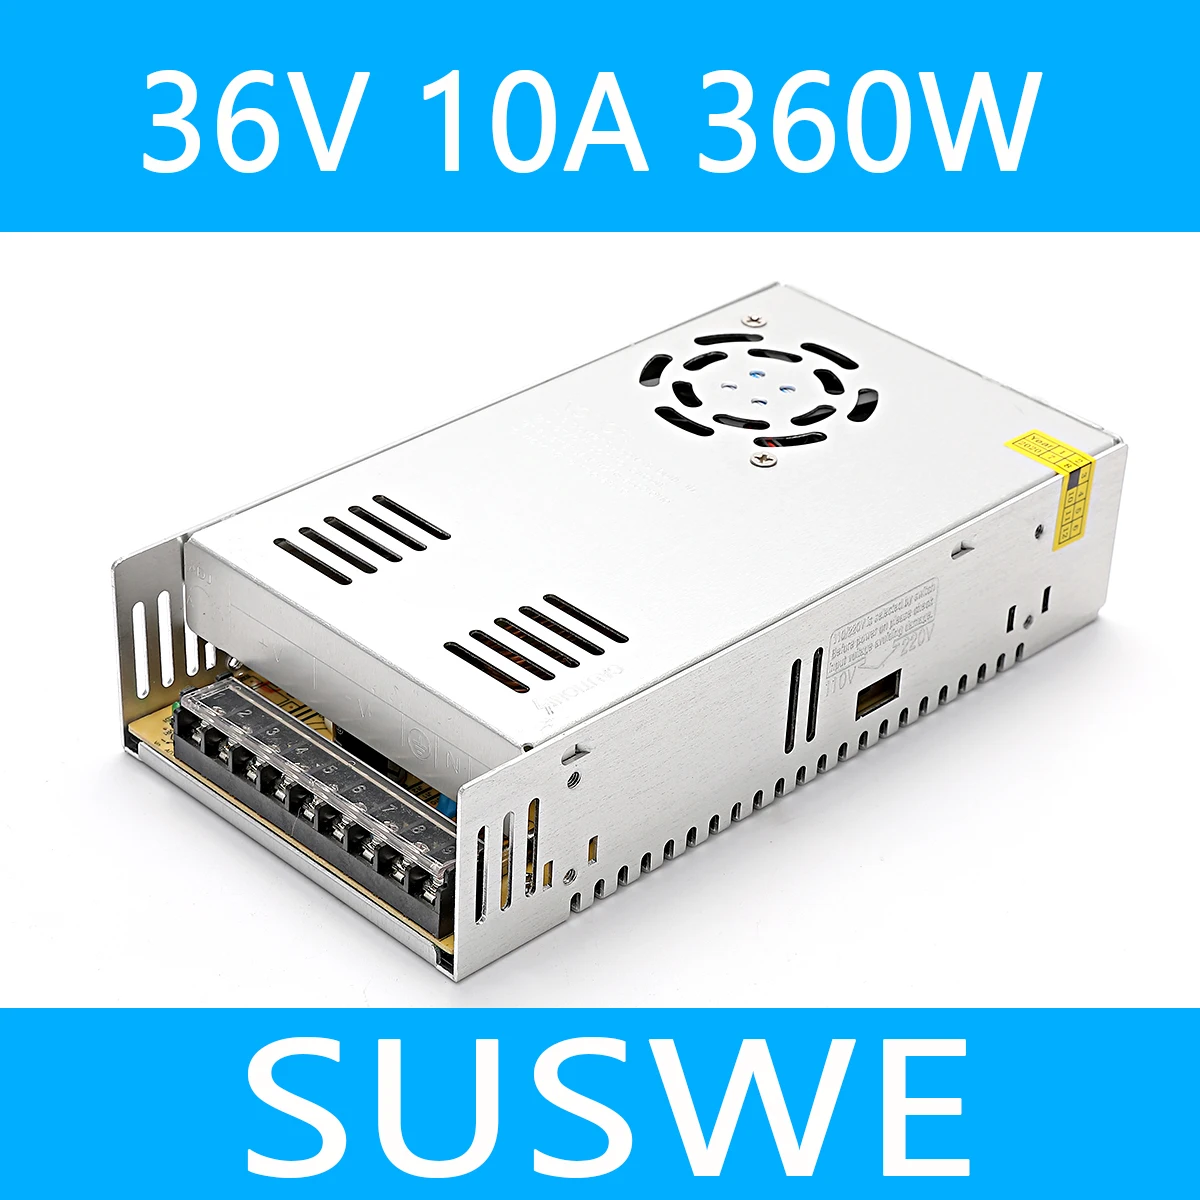 

brand-new 36V 10A 360W Switching Power Supply Driver for LED Strip AC 110/220V Input to DC 36V10A SUSWE